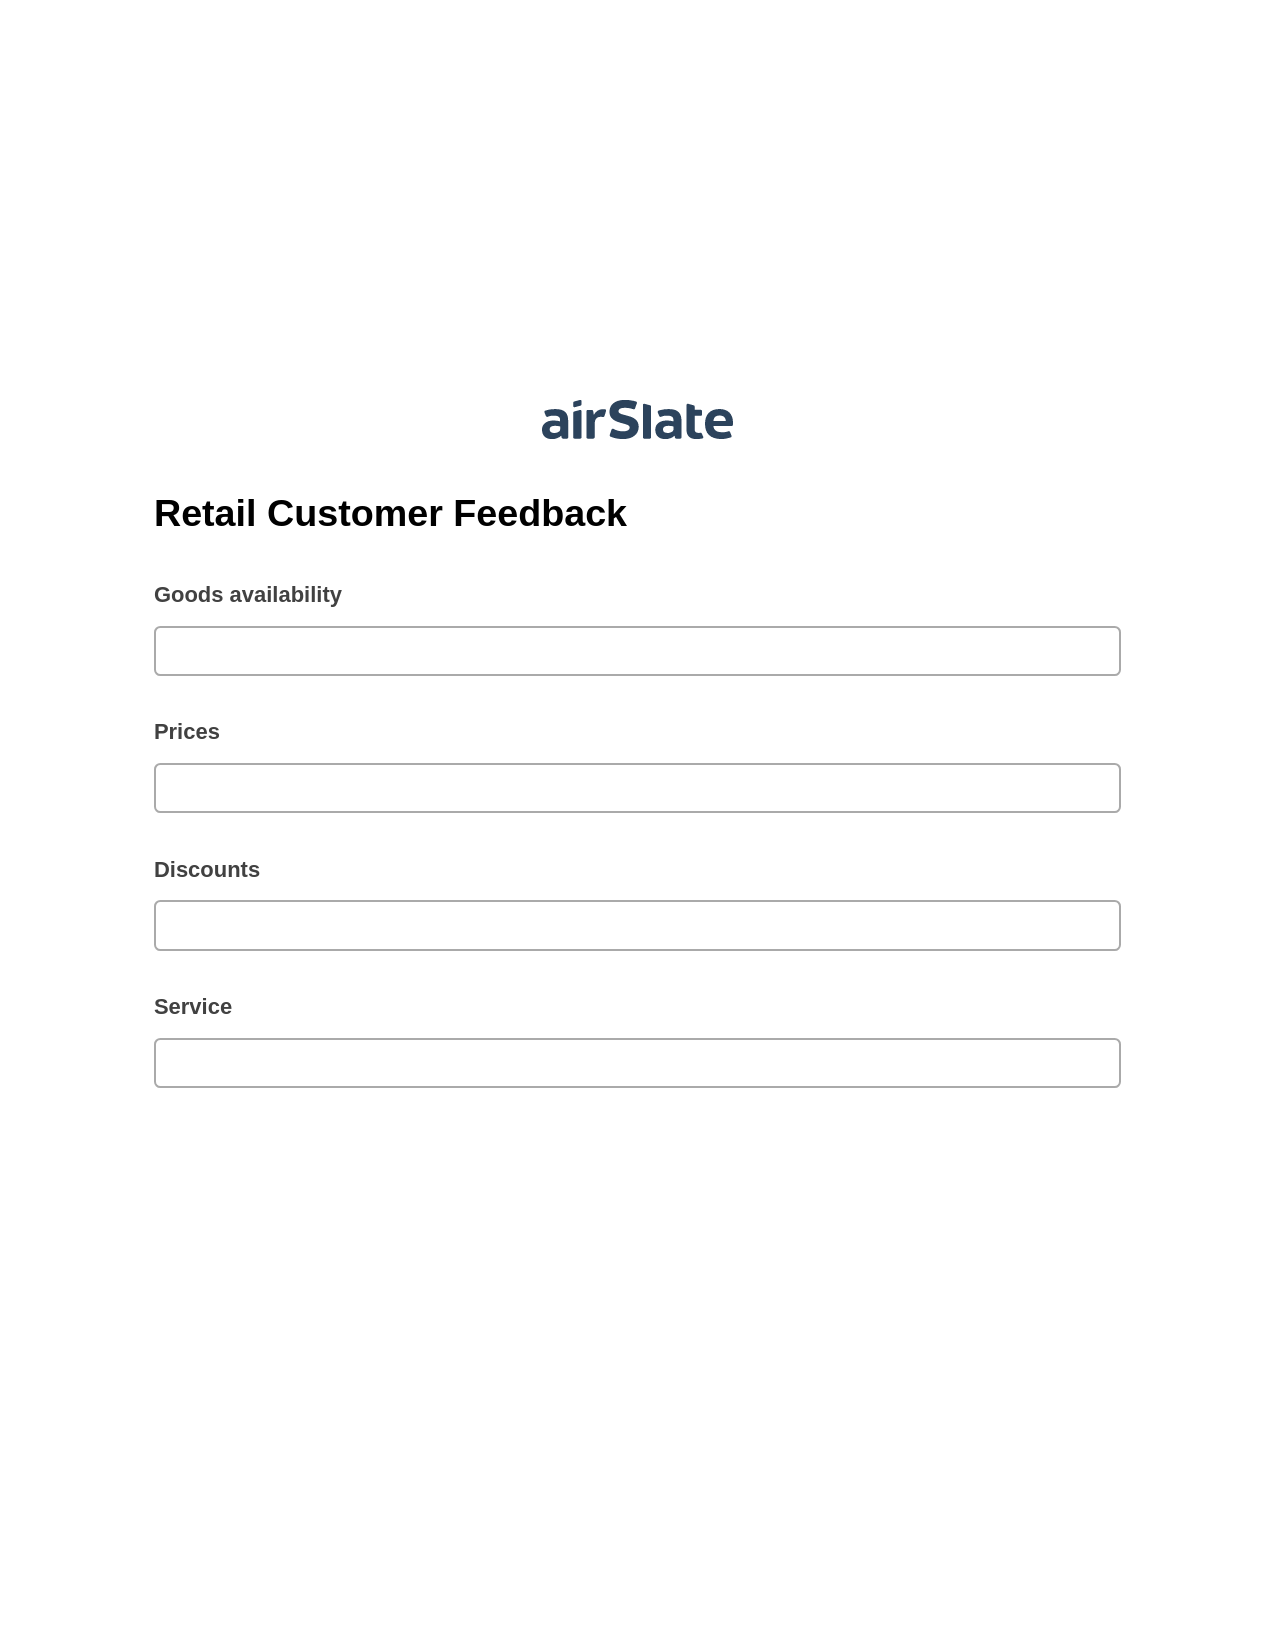 Retail Customer Feedback Pre-fill from another Slate Bot, Google Sheet Two-Way Binding Bot, Export to Formstack Documents Bot